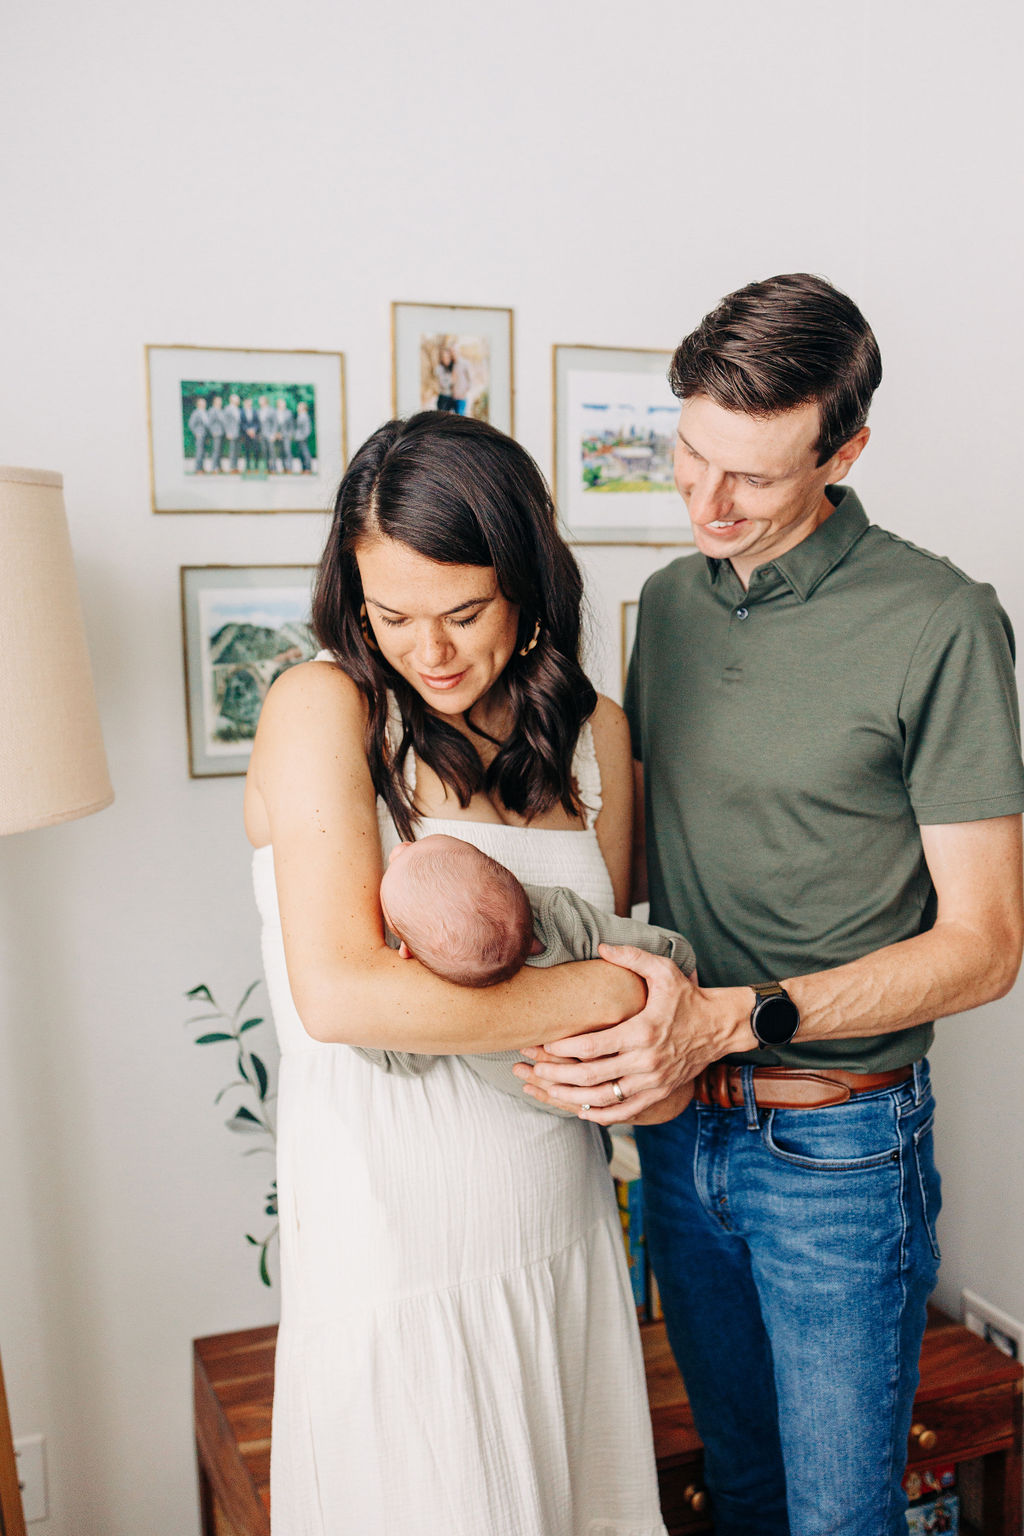 A mom holds her sleeping newborn baby in her arms while dad places a hand on the baby